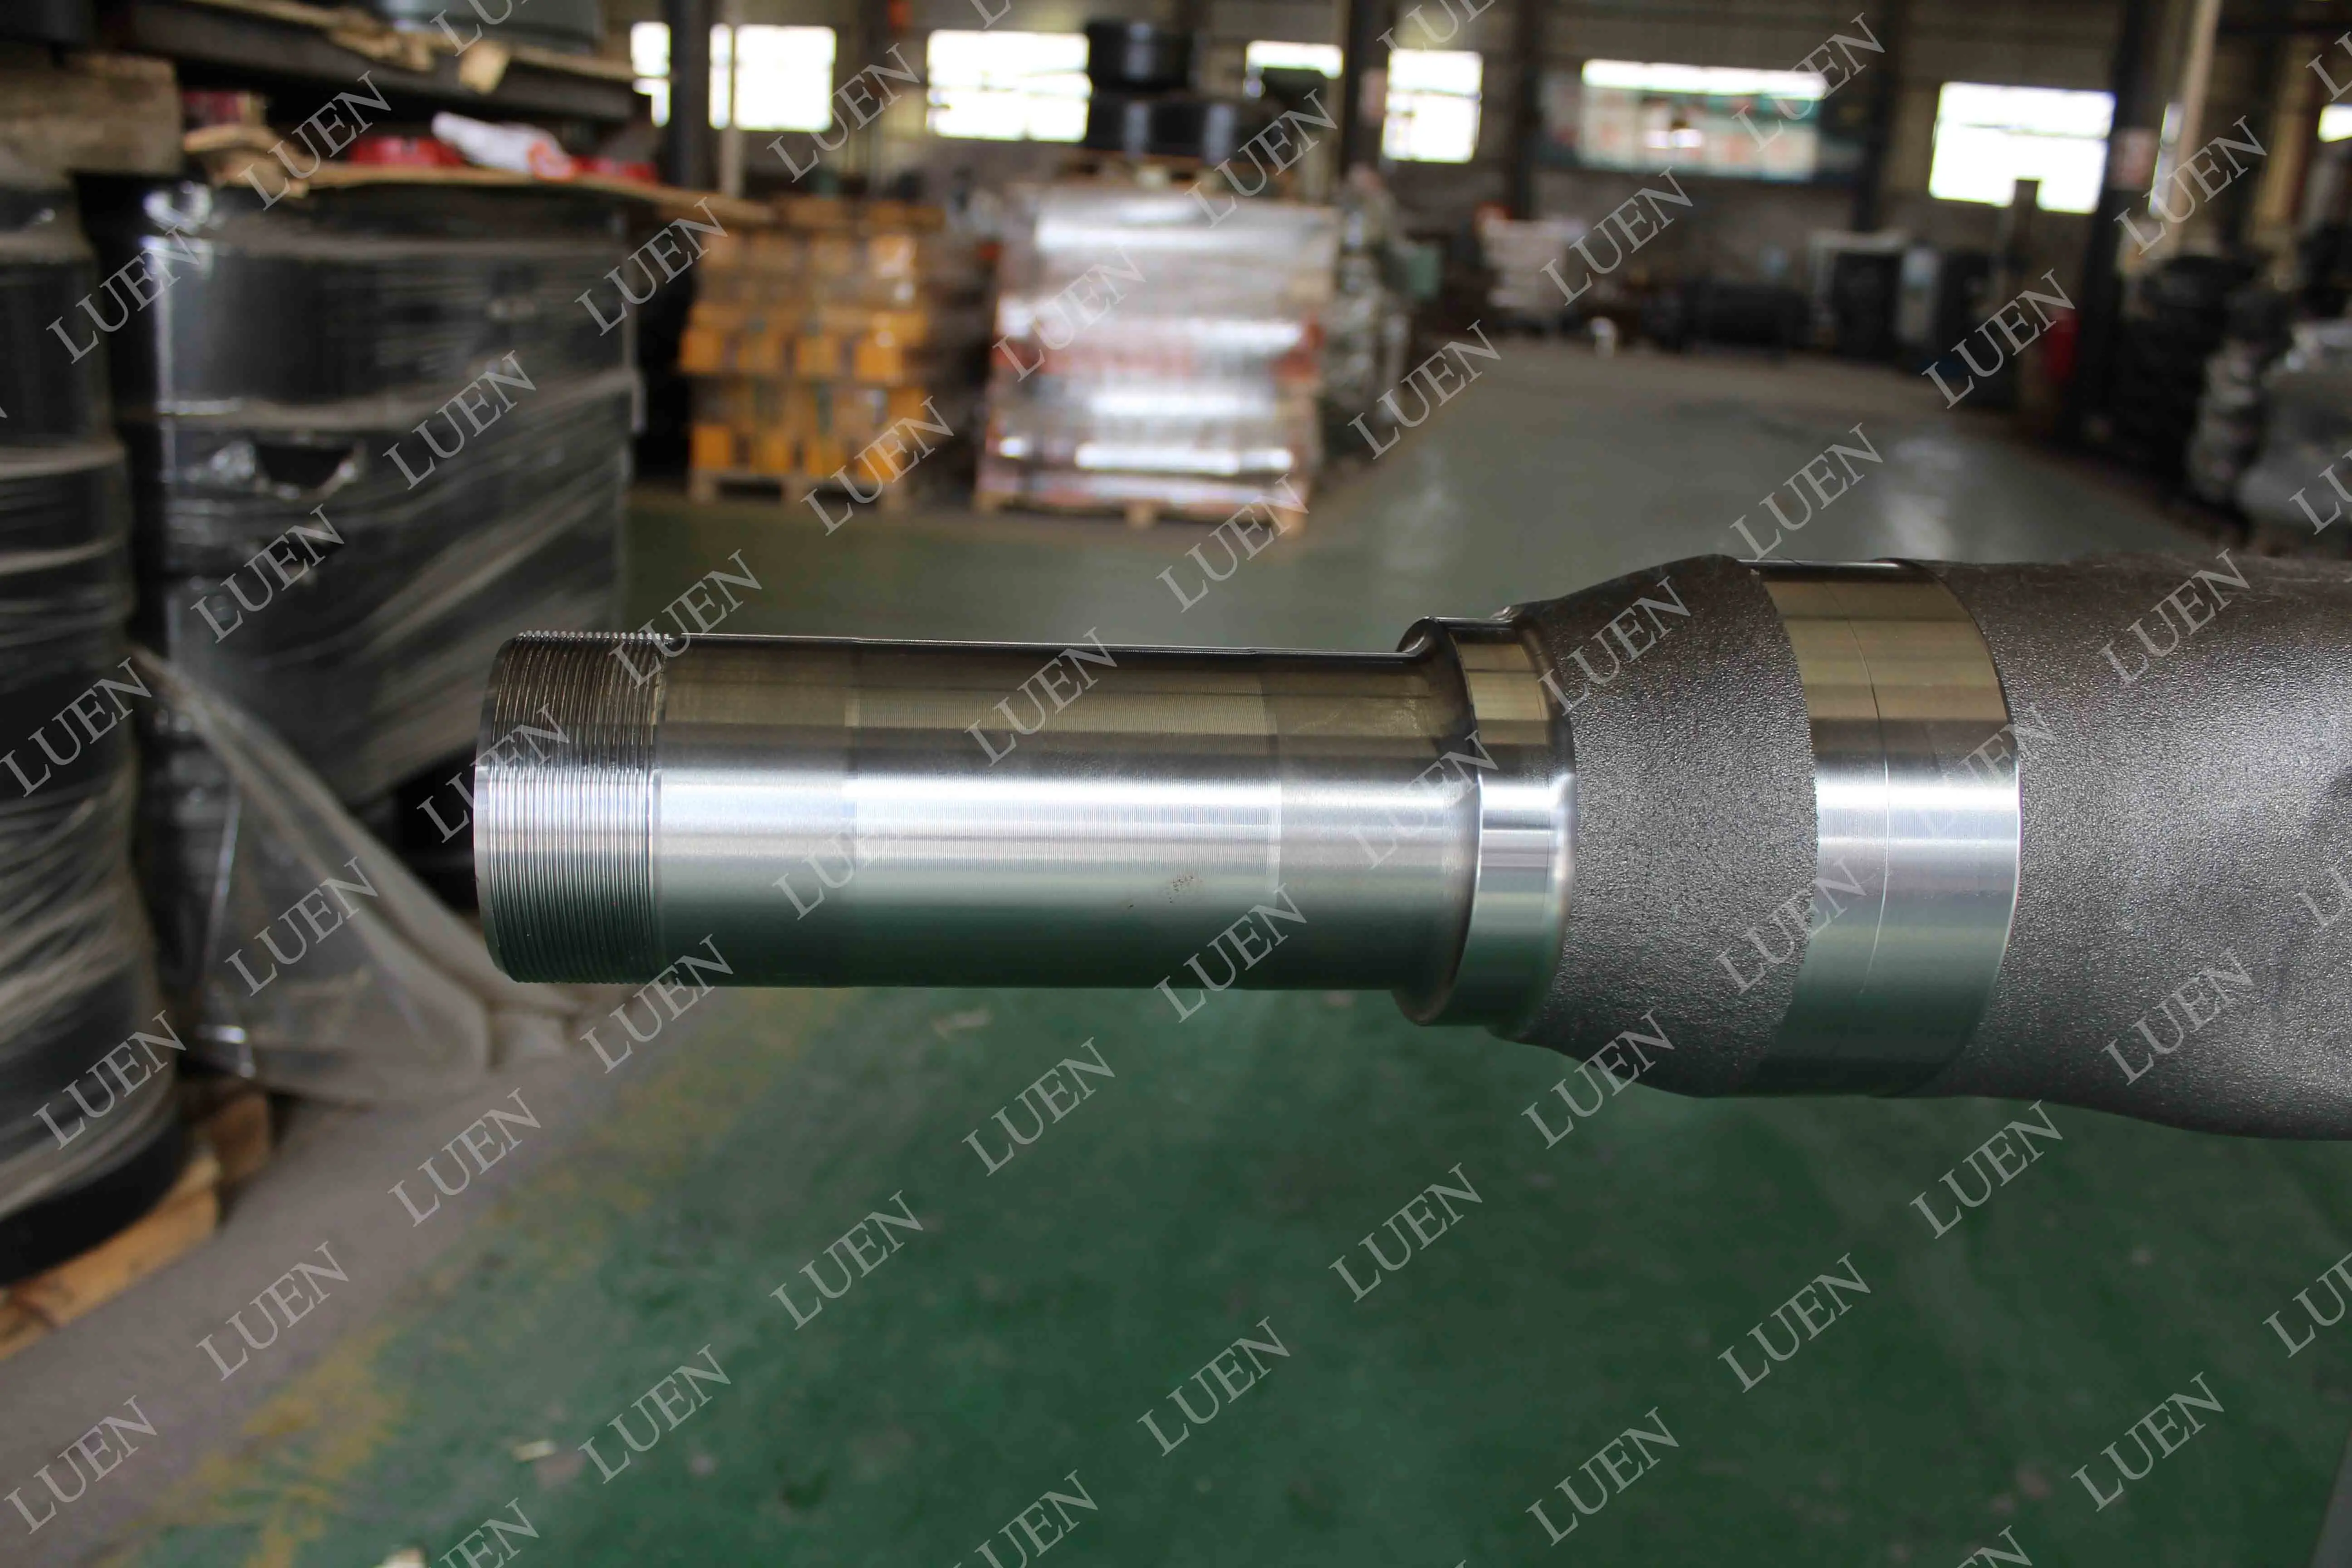 16T square axle tube  American Shaft Tube is suitable for truck trailer axle parts casting